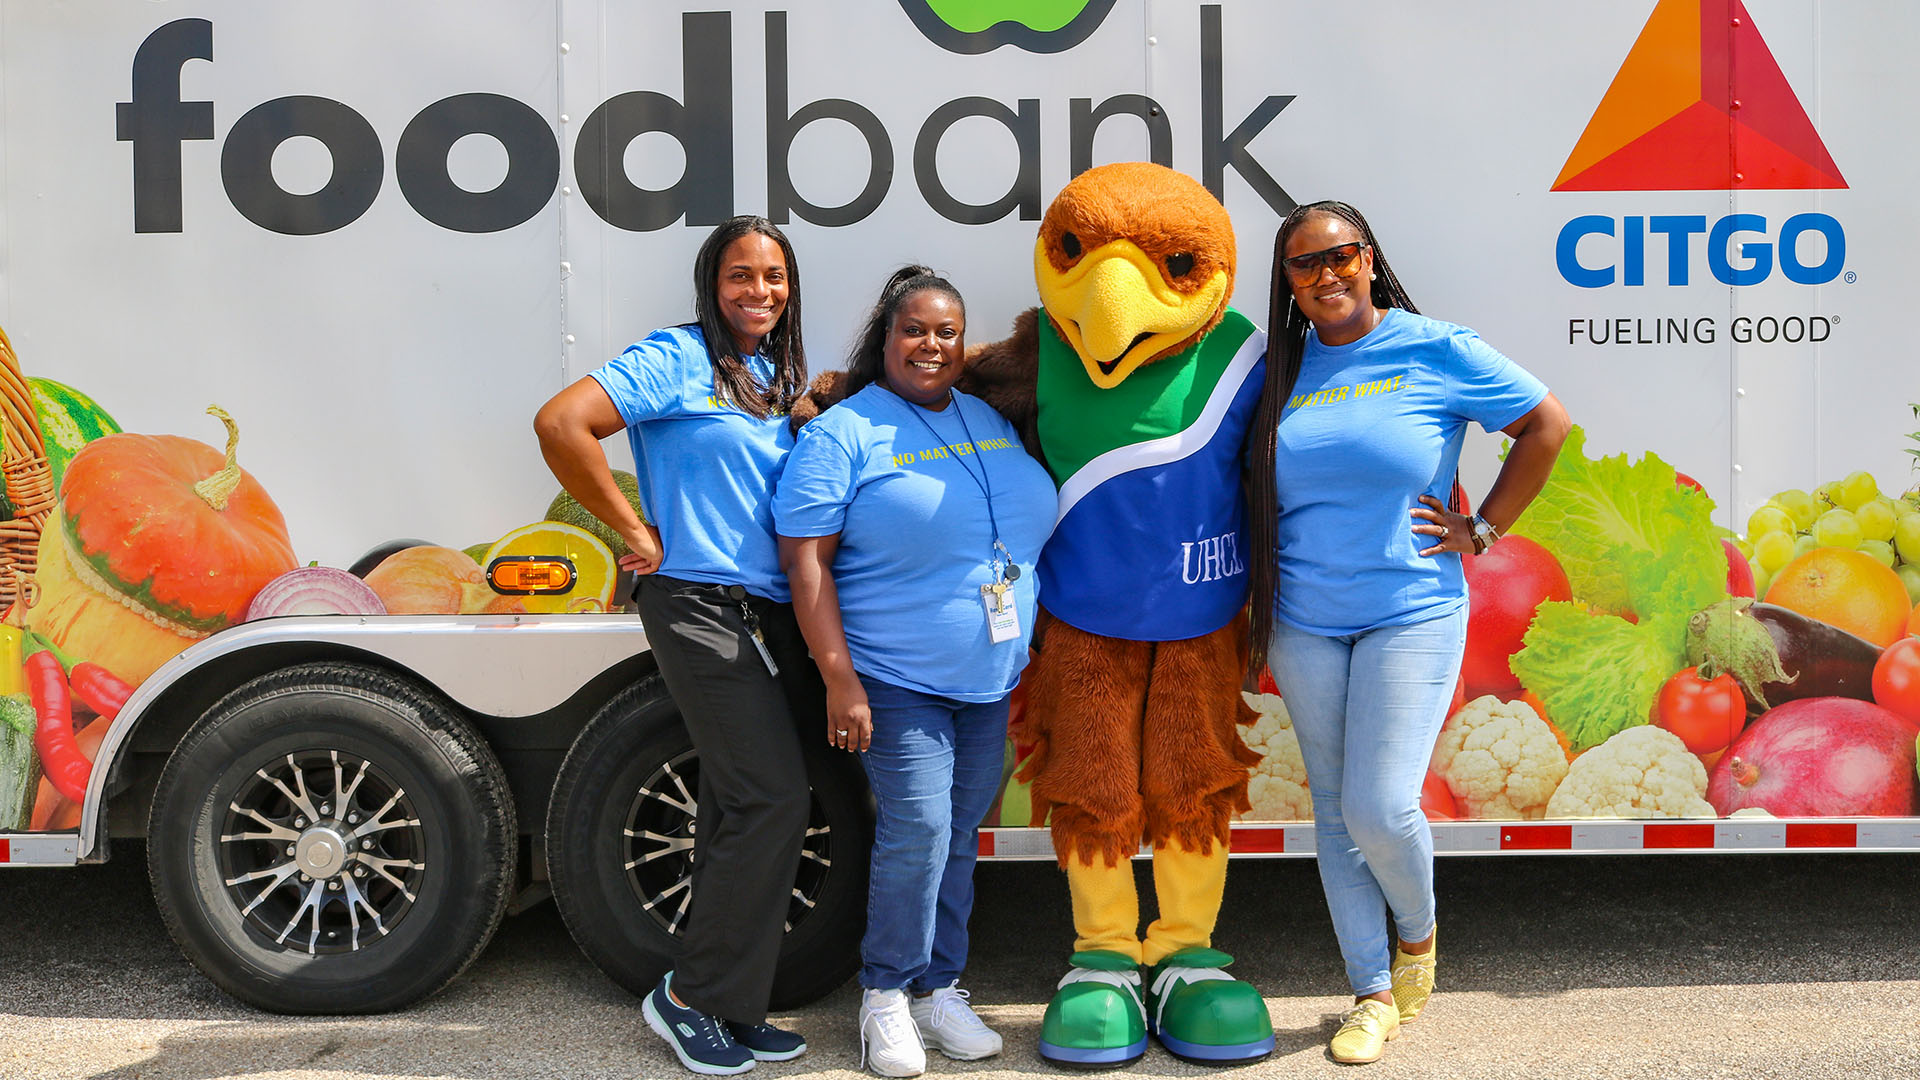 The OSA staff and Hunter Hawk gathered in front of a Houston Food Bank truck